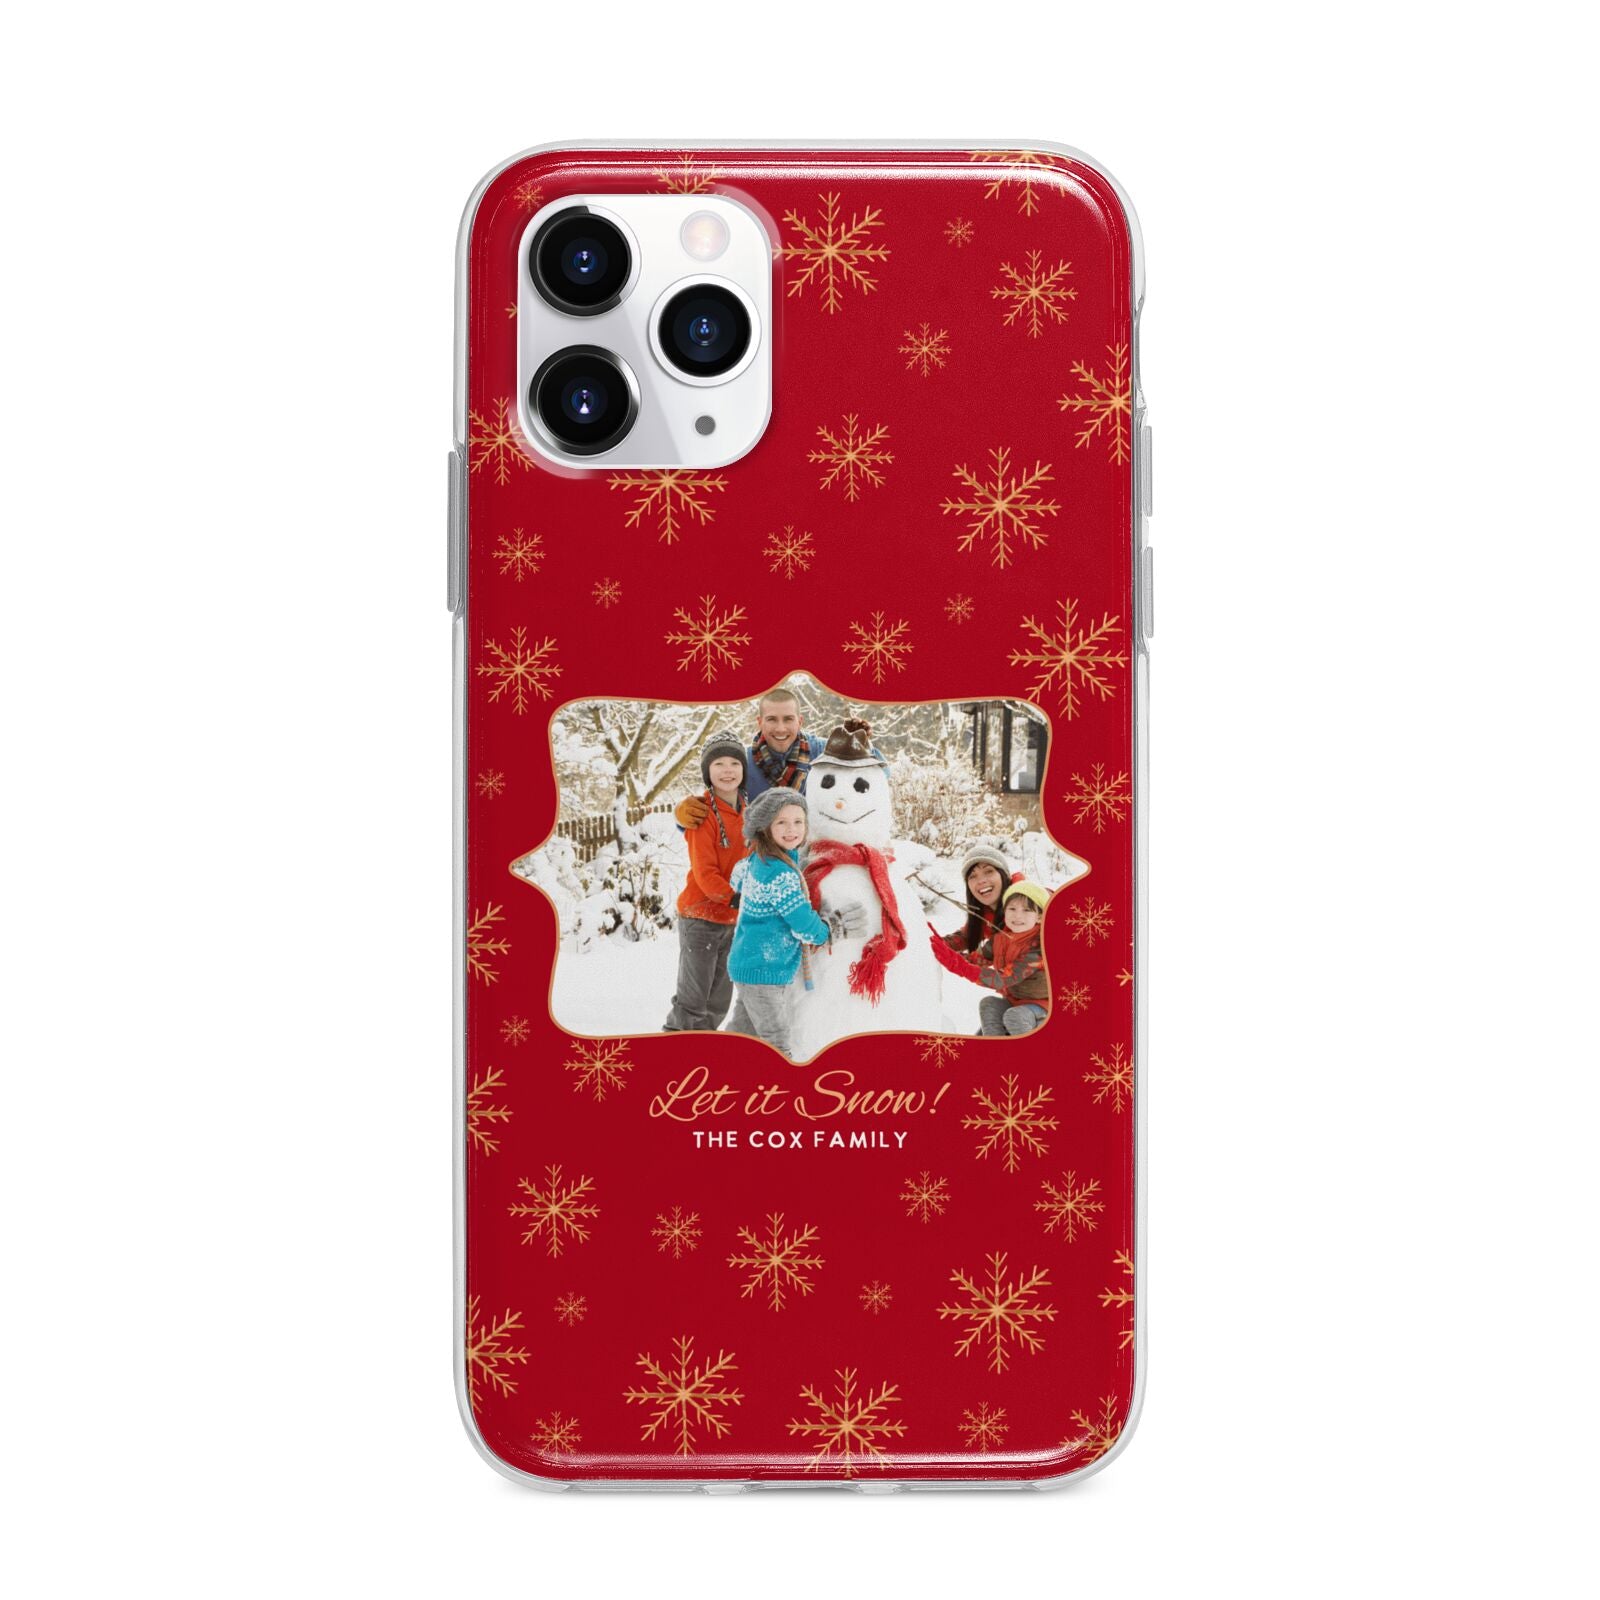 Let it Snow Christmas Photo Upload Apple iPhone 11 Pro in Silver with Bumper Case